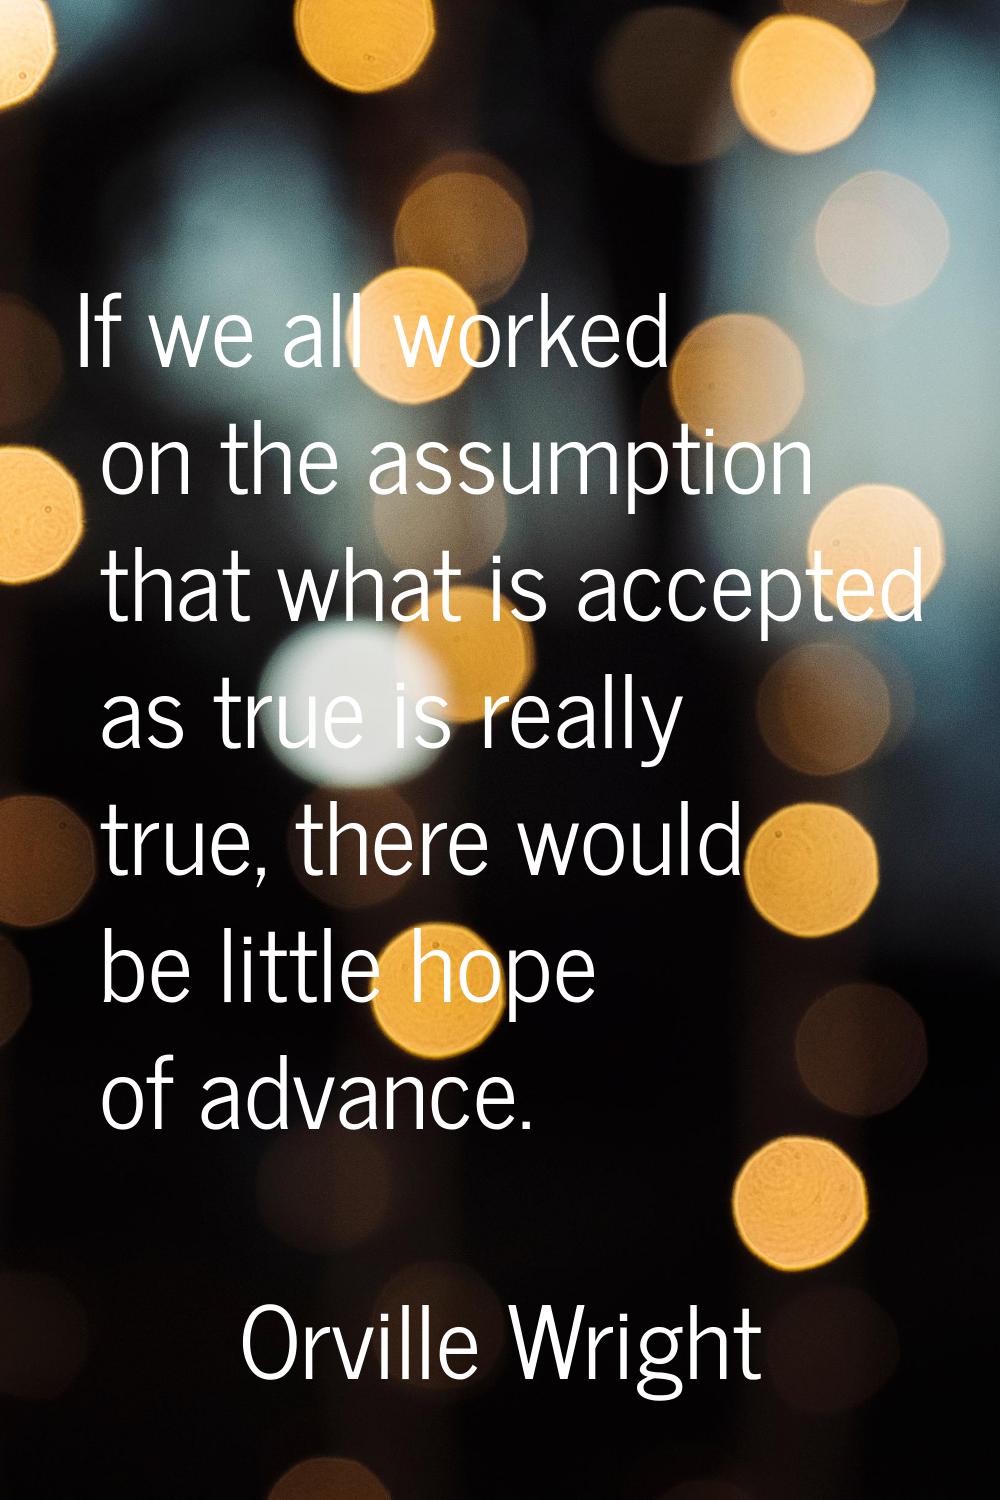 If we all worked on the assumption that what is accepted as true is really true, there would be lit